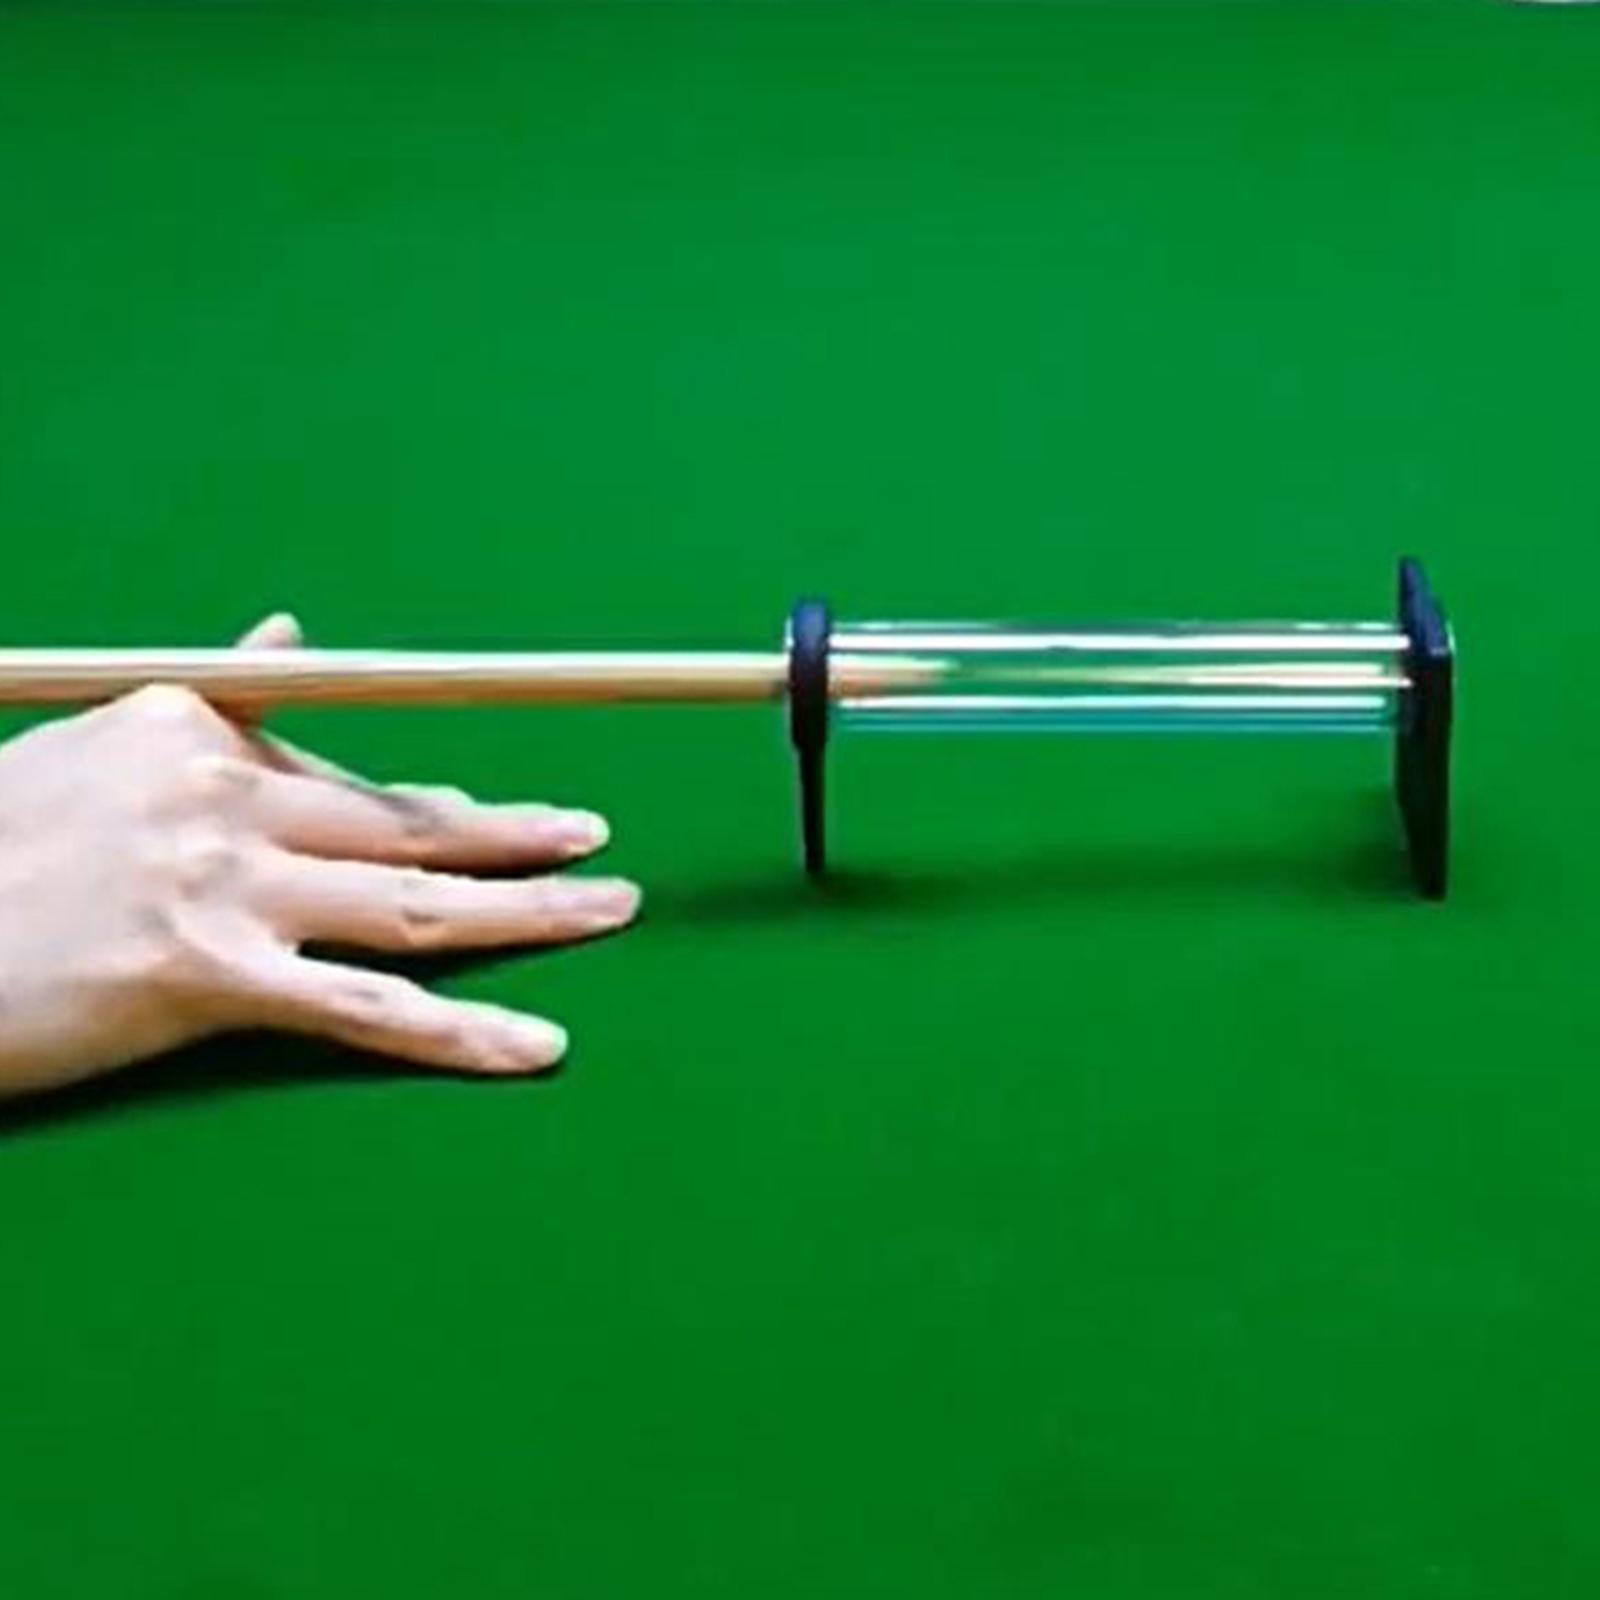 Billiards Training Accessories Pool Stroke Trainer Aiming Practice Tool Professional Player Billiards Game Lightweight Billiards Rod Trainer